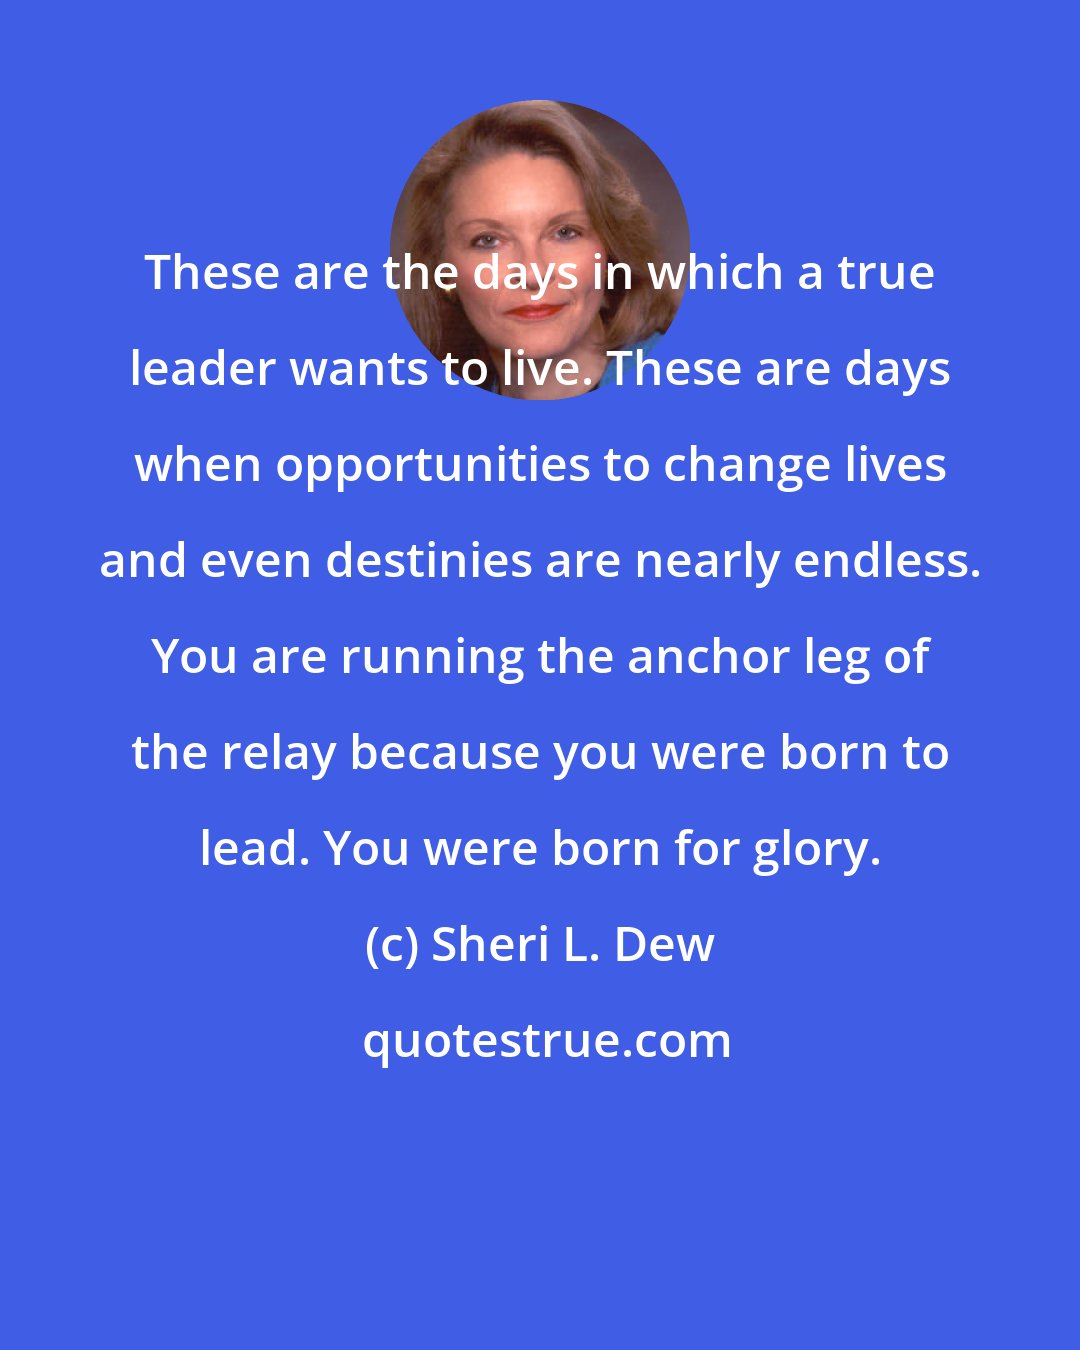 Sheri L. Dew: These are the days in which a true leader wants to live. These are days when opportunities to change lives and even destinies are nearly endless. You are running the anchor leg of the relay because you were born to lead. You were born for glory.